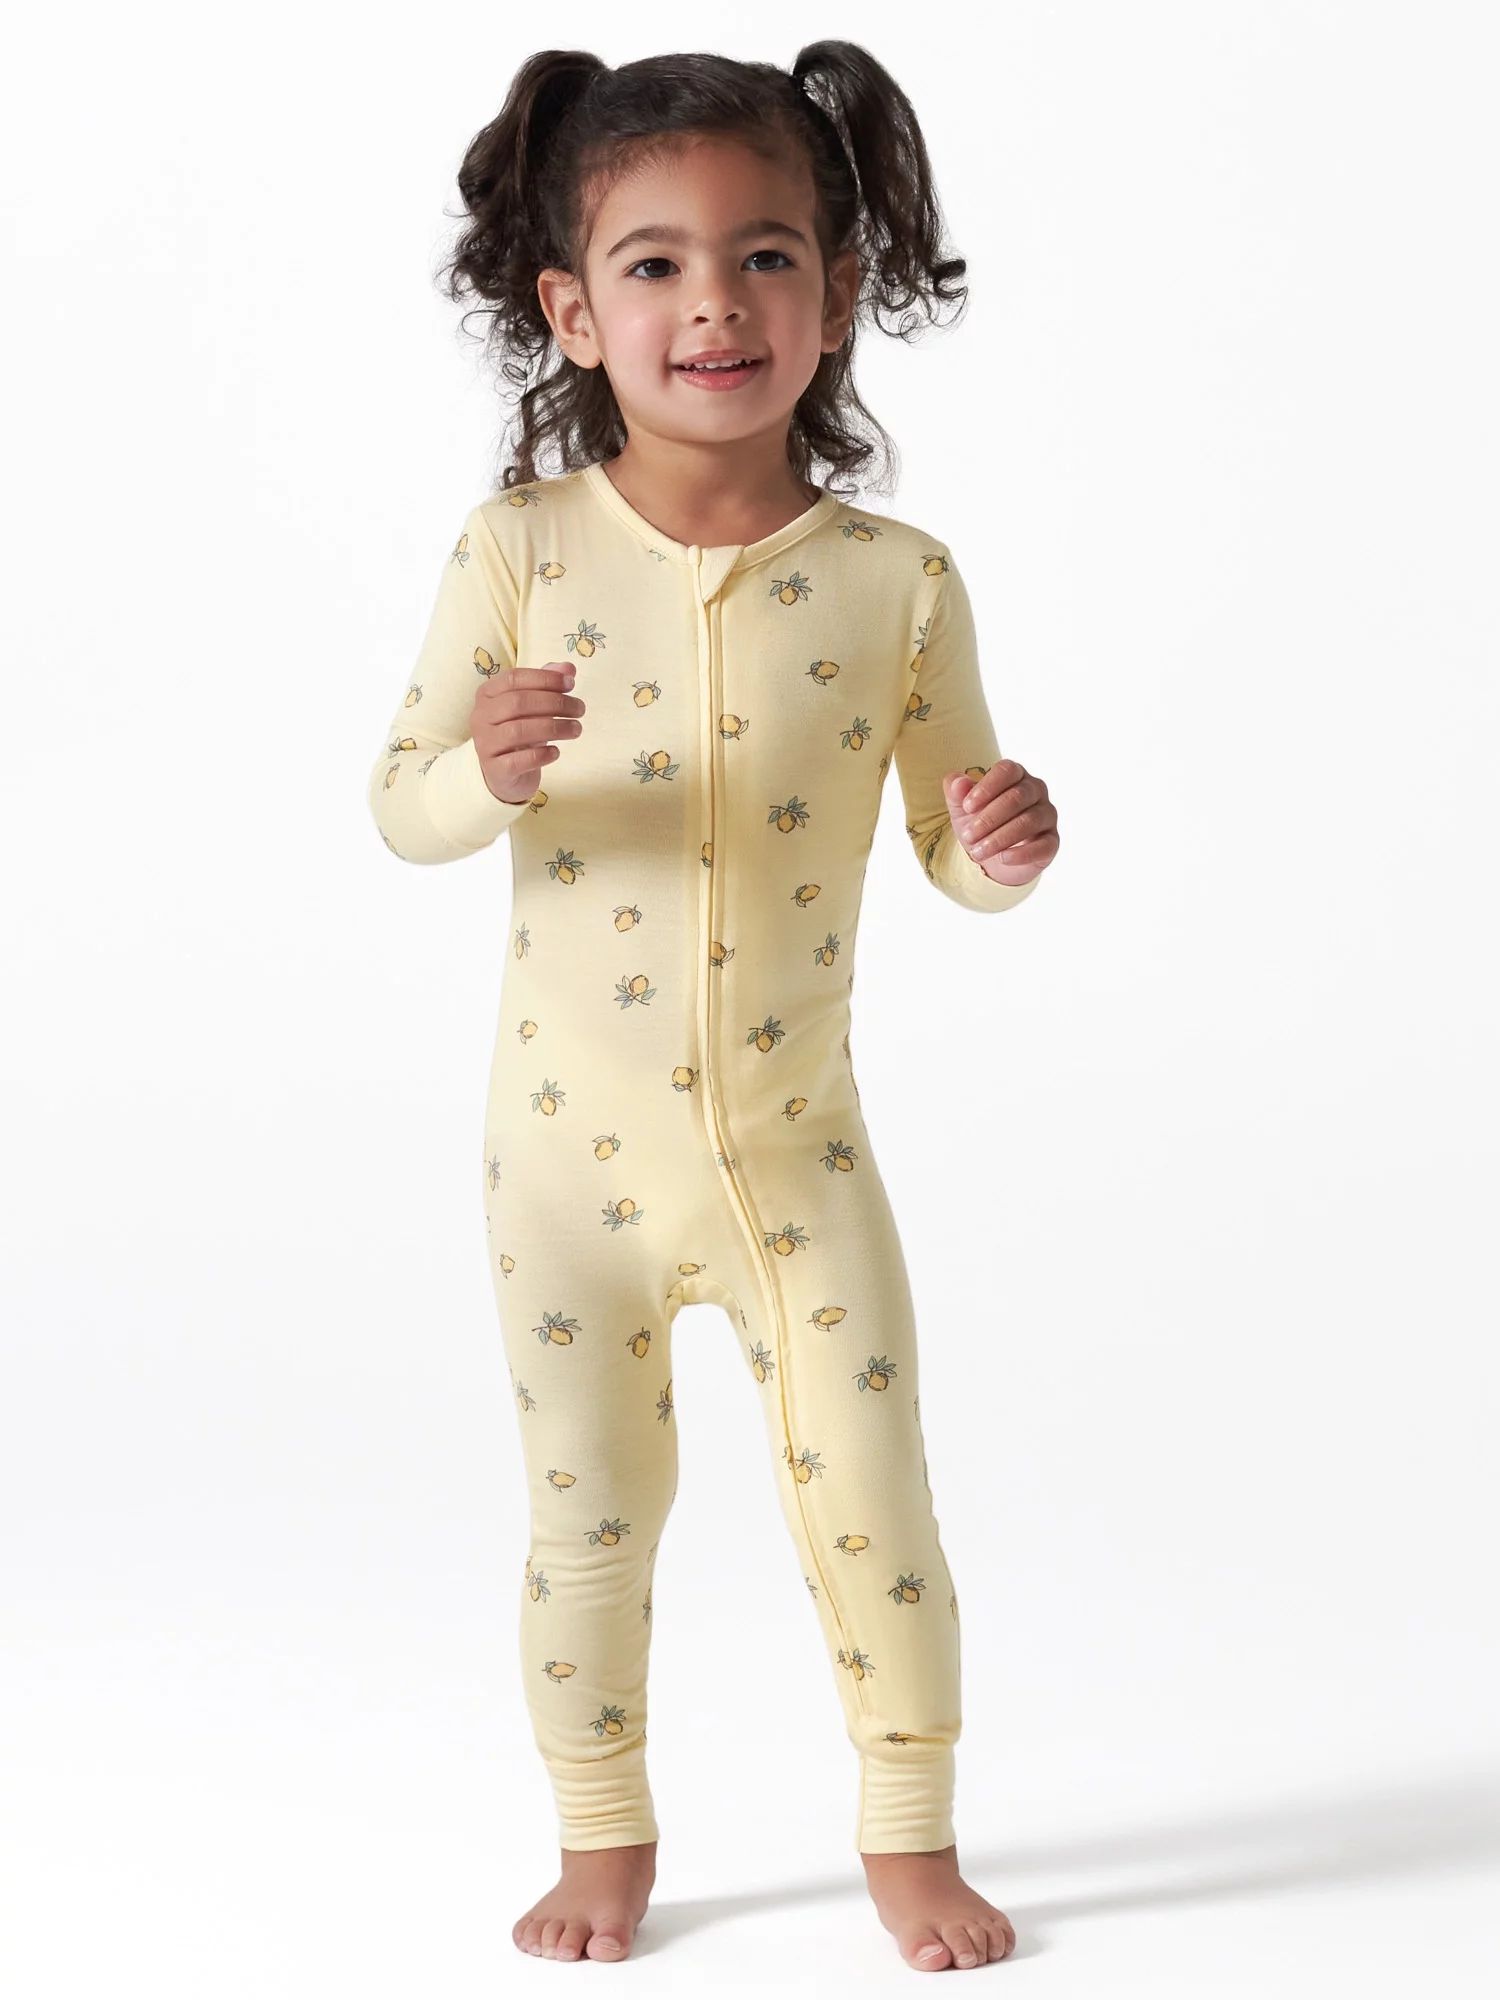 Modern Moments by Gerber Unisex Baby and Toddler Snug Fit Coverall Pajamas, Sizes 12M-5T | Walmart (US)